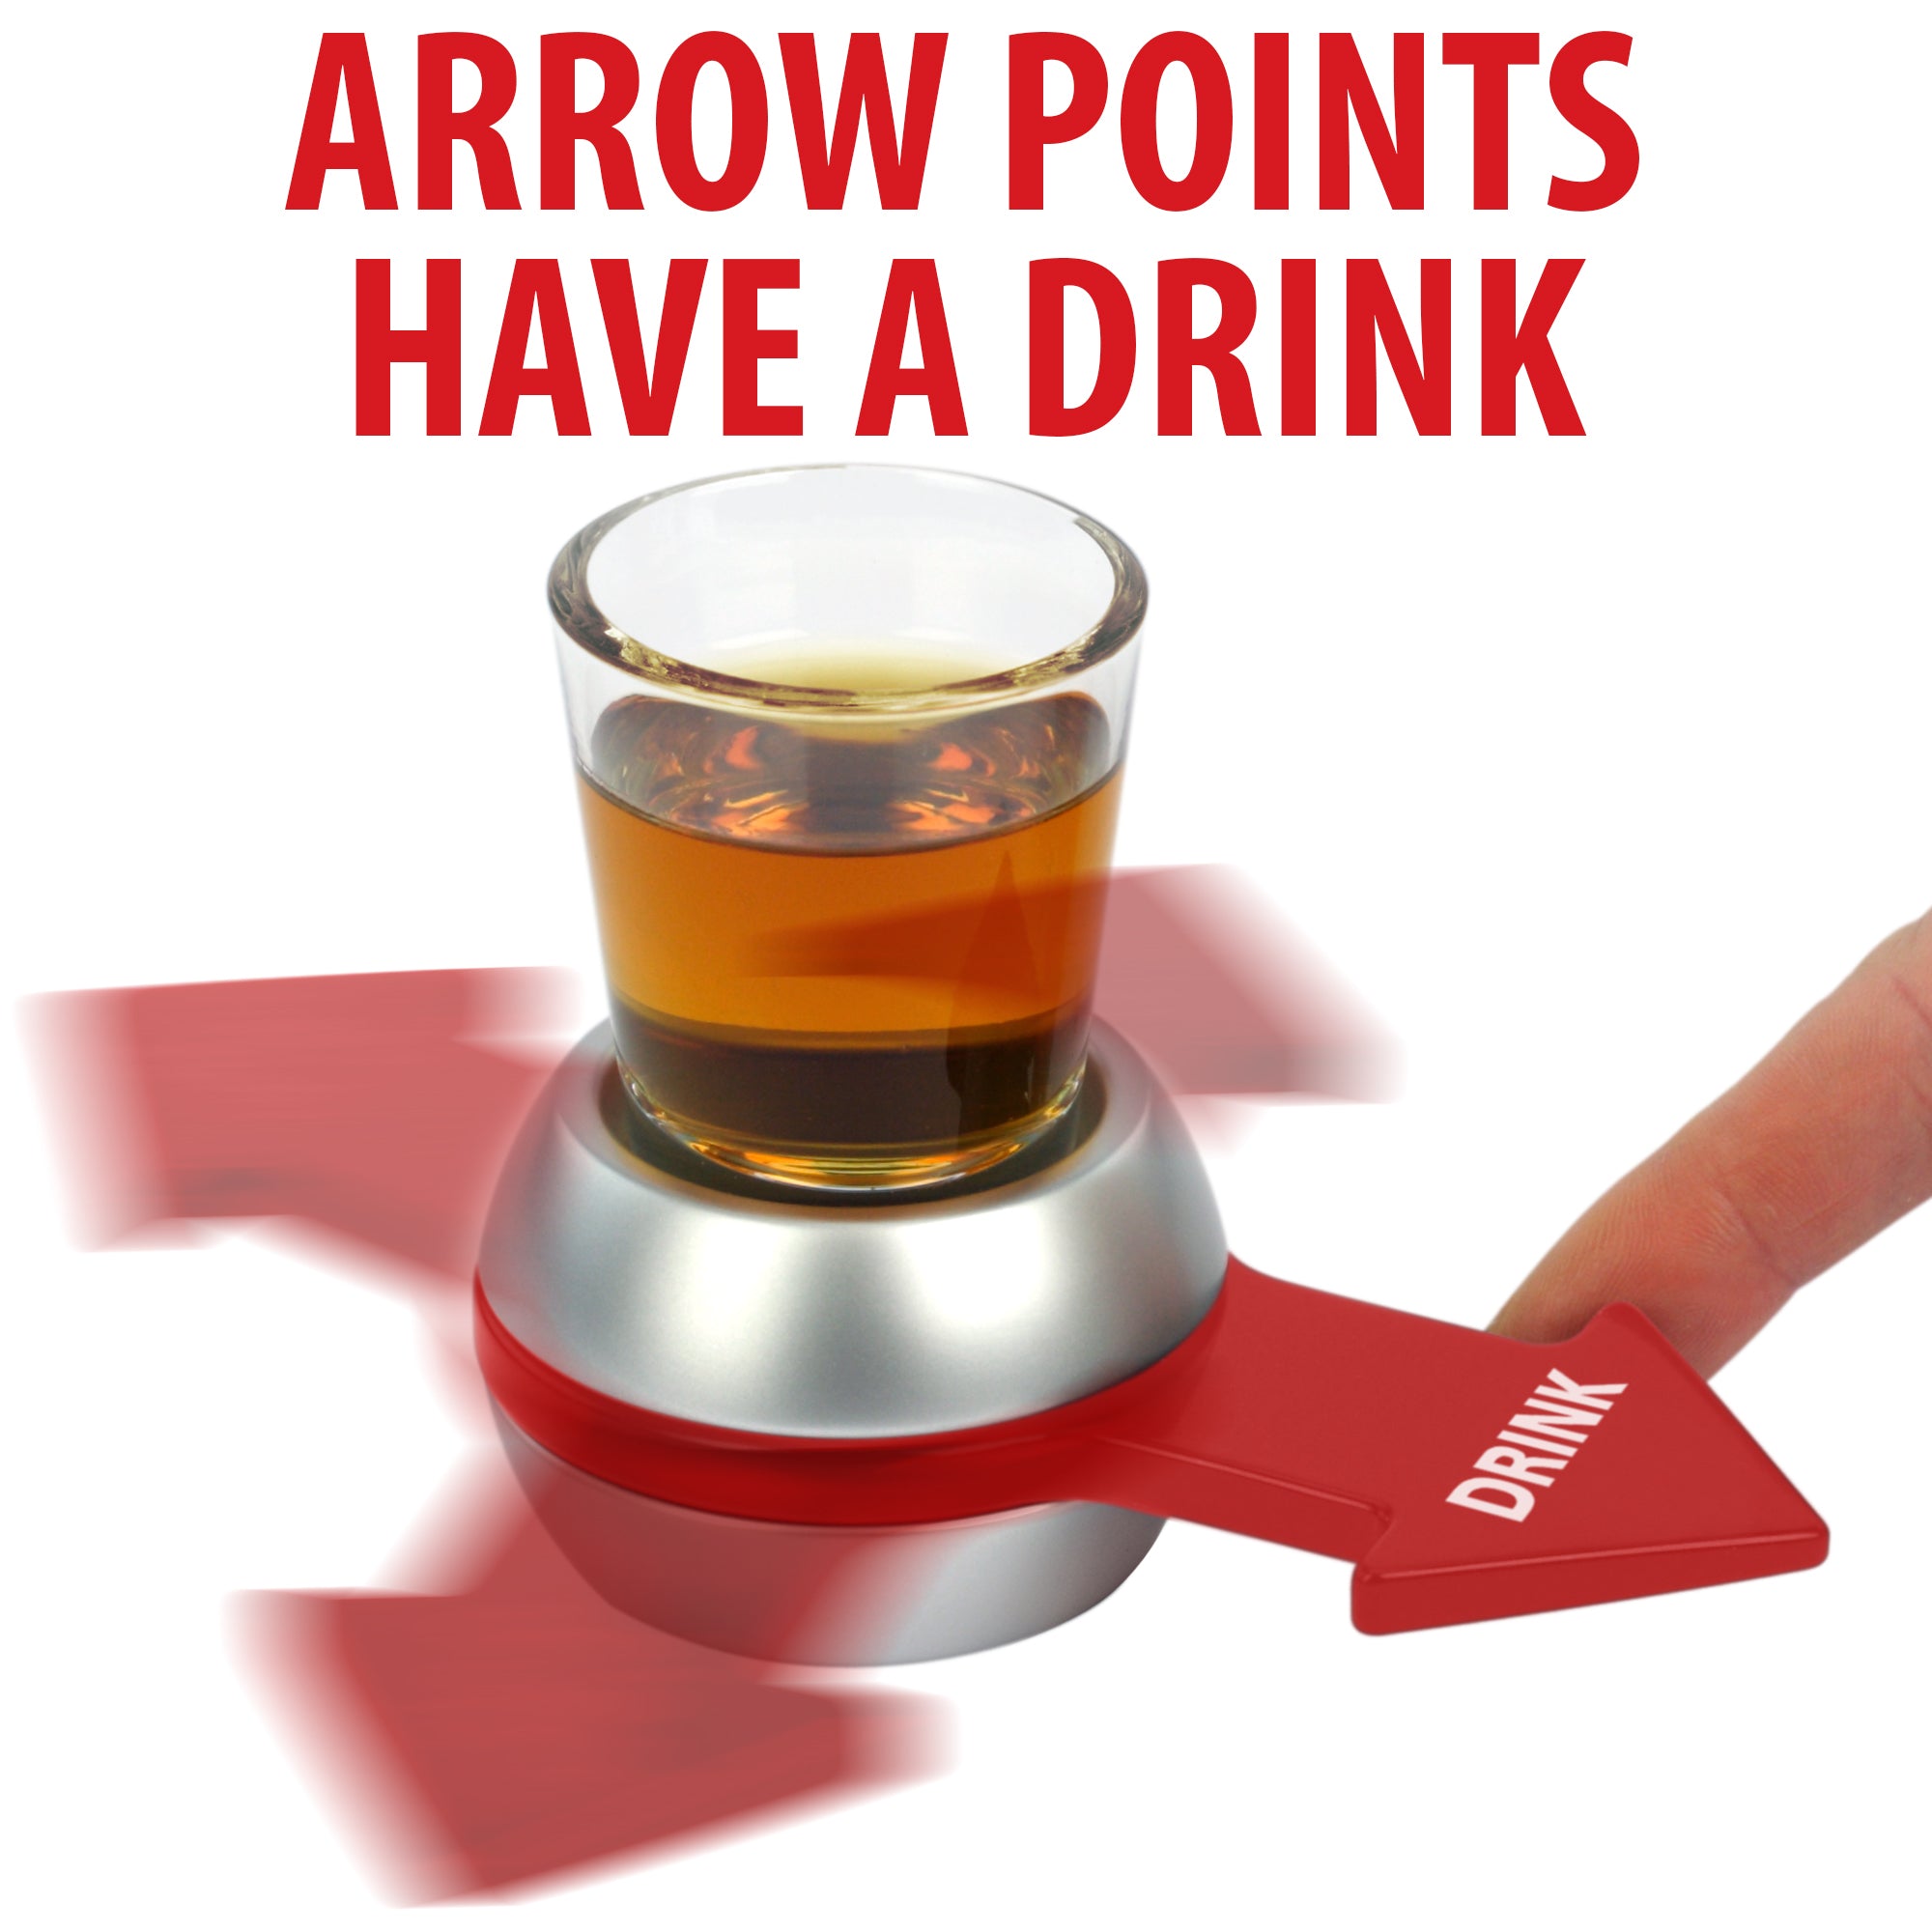 Spin the Shot - Fun Party Drinking Game - Pour a Shot, Spin and Drink – My  Polish Heritage